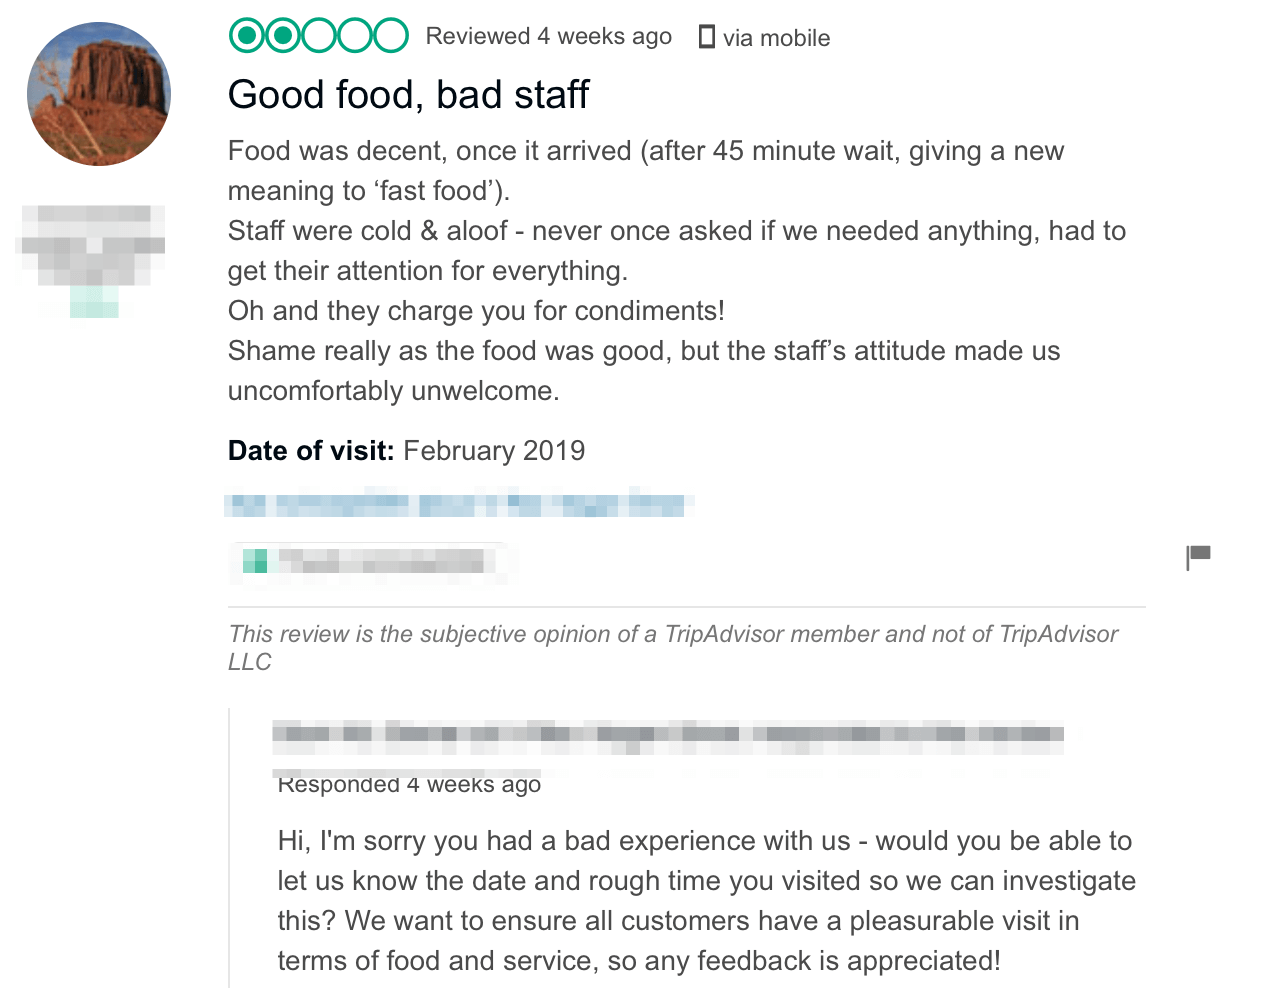 An example of a negative customer review.